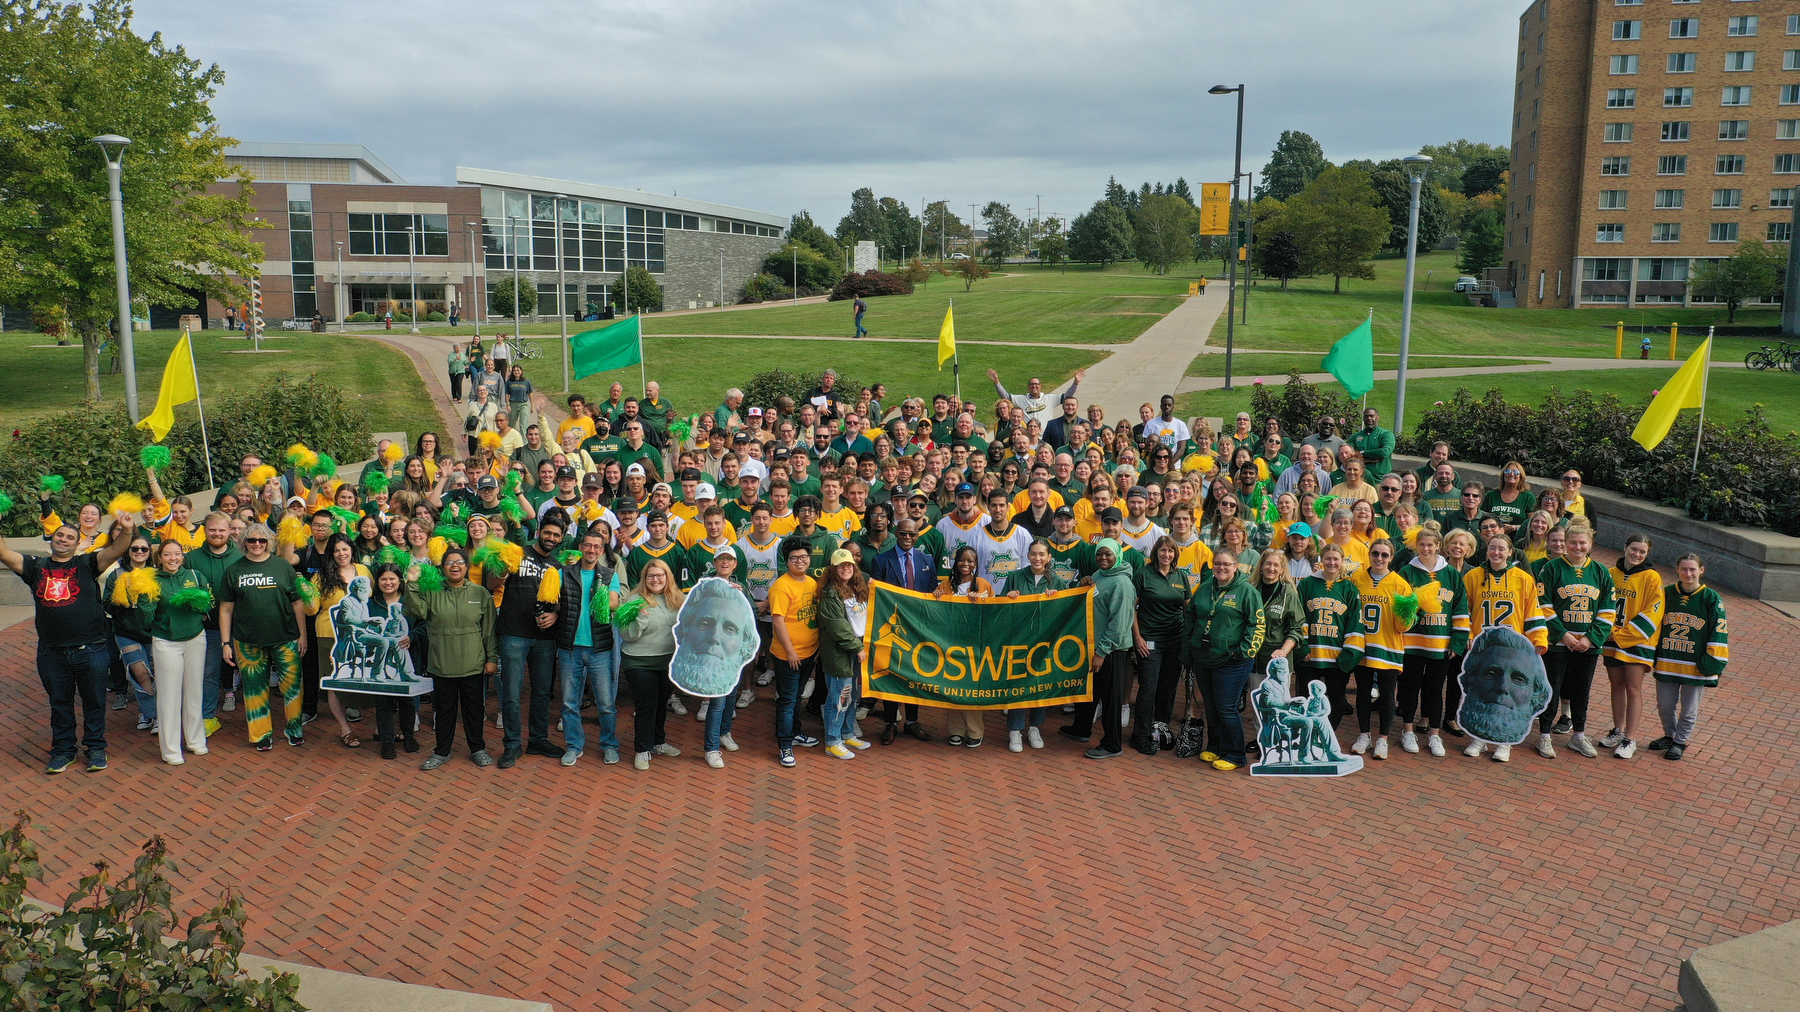 Laker pride was on full display on Green and Gold Day as students, faculty, staff, alumni, and friends gathered with President Peter O. Nwosu on Sept. 29 for the annual Green and Gold Day photo during the start of Founder’s Weekend.